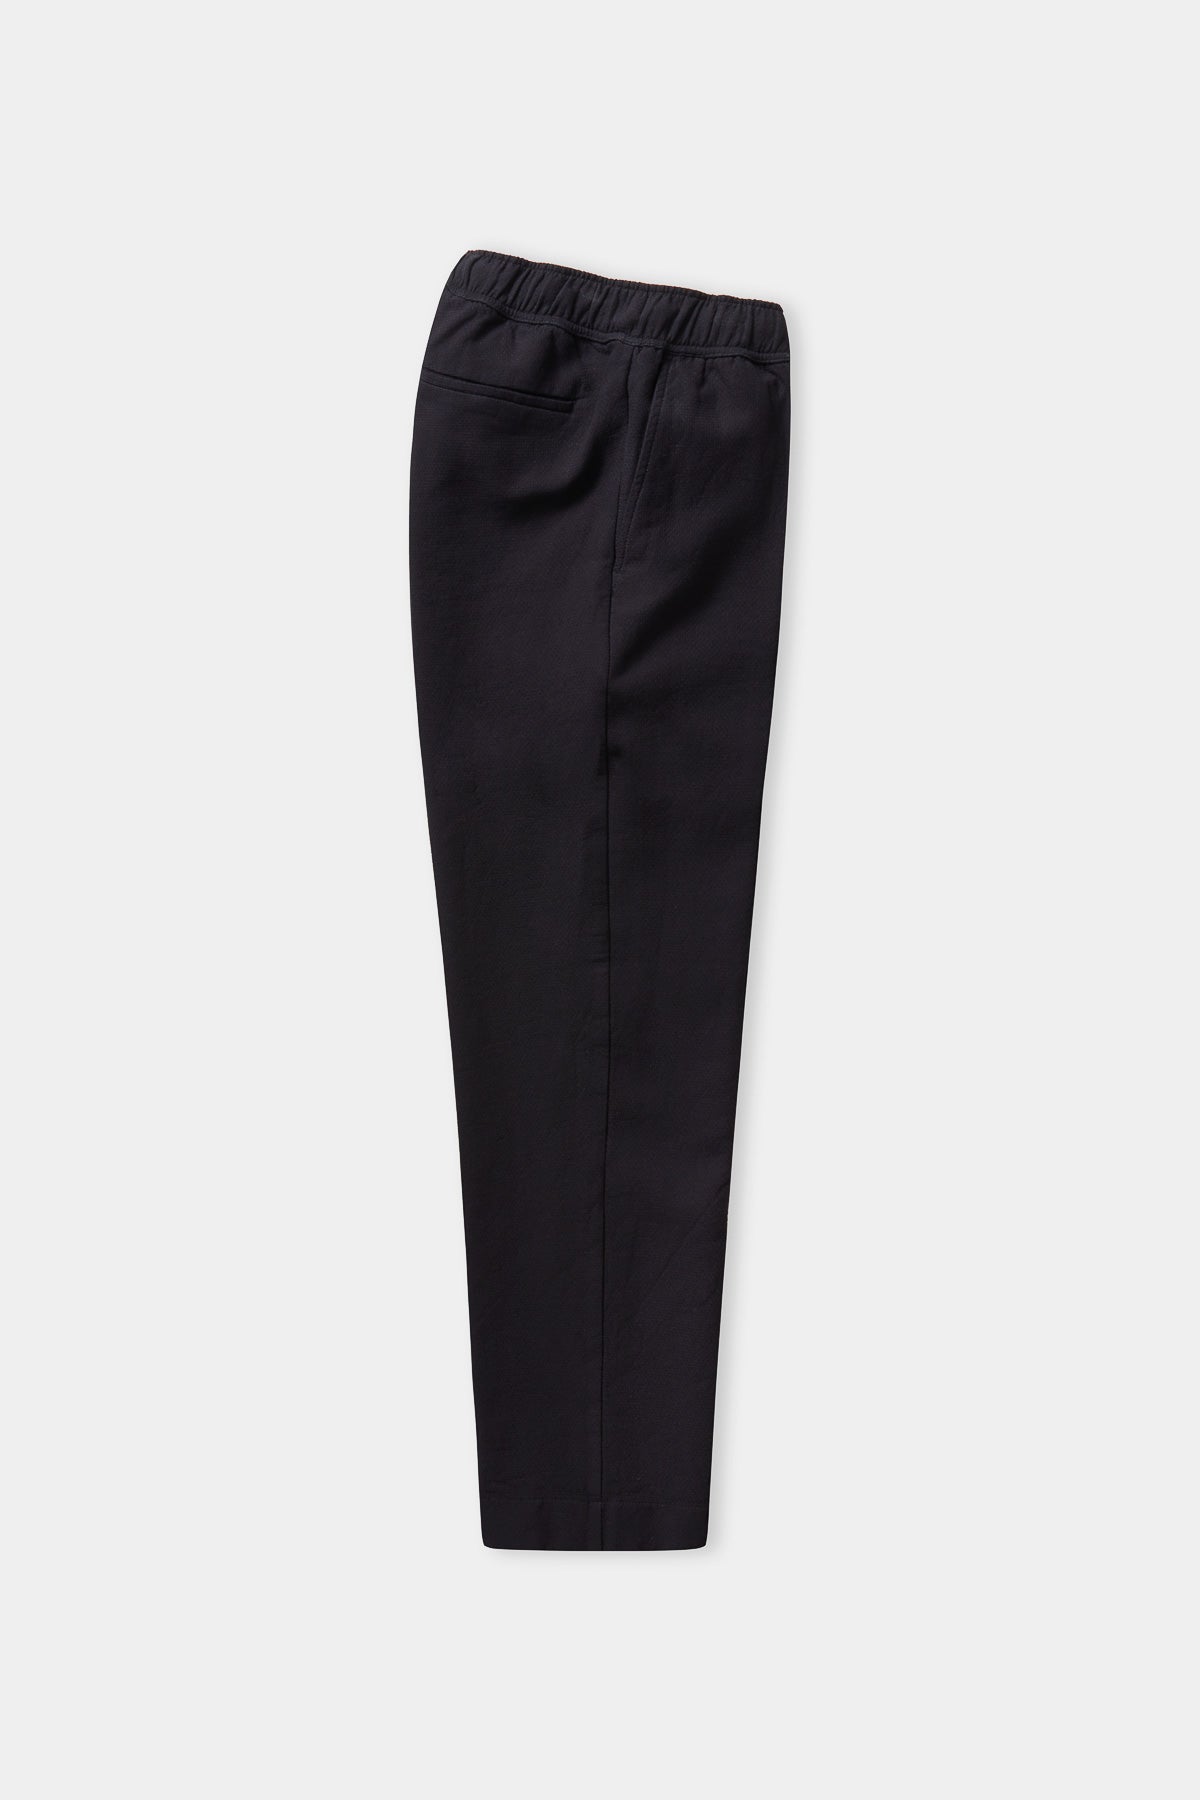 MAX trousers eco structured black